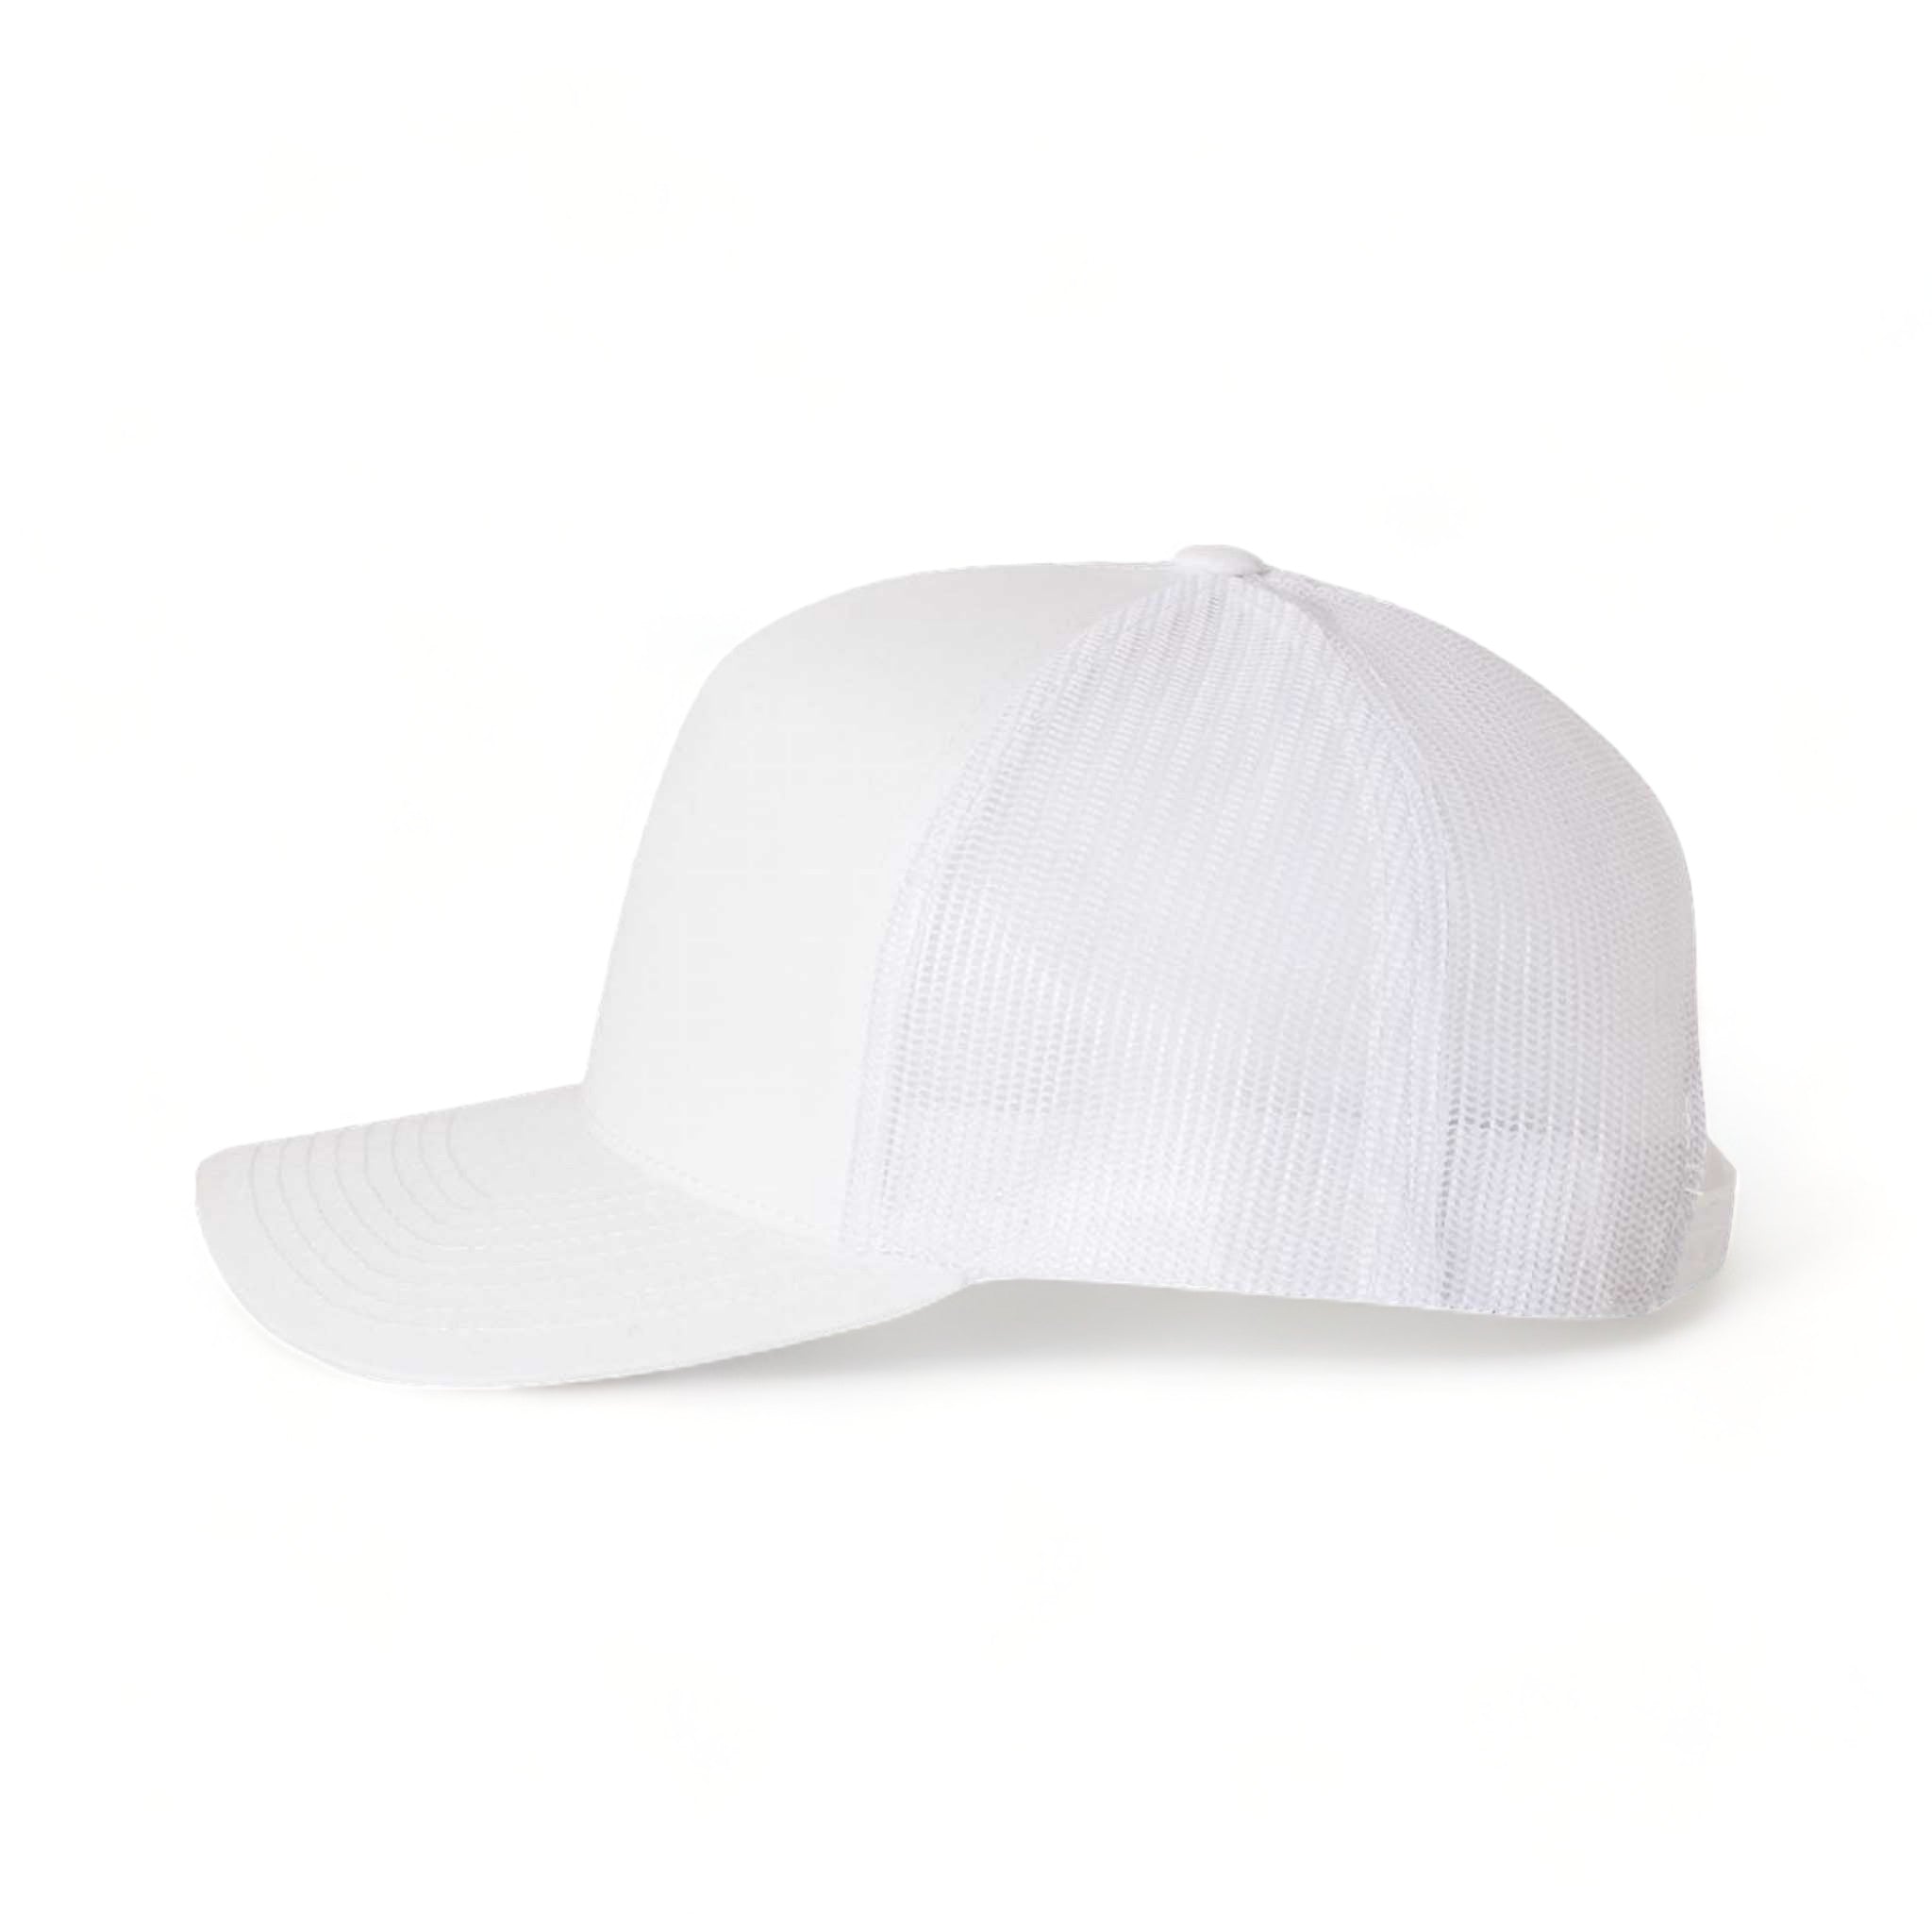 Side view of YP Classics 6506 custom hat in white